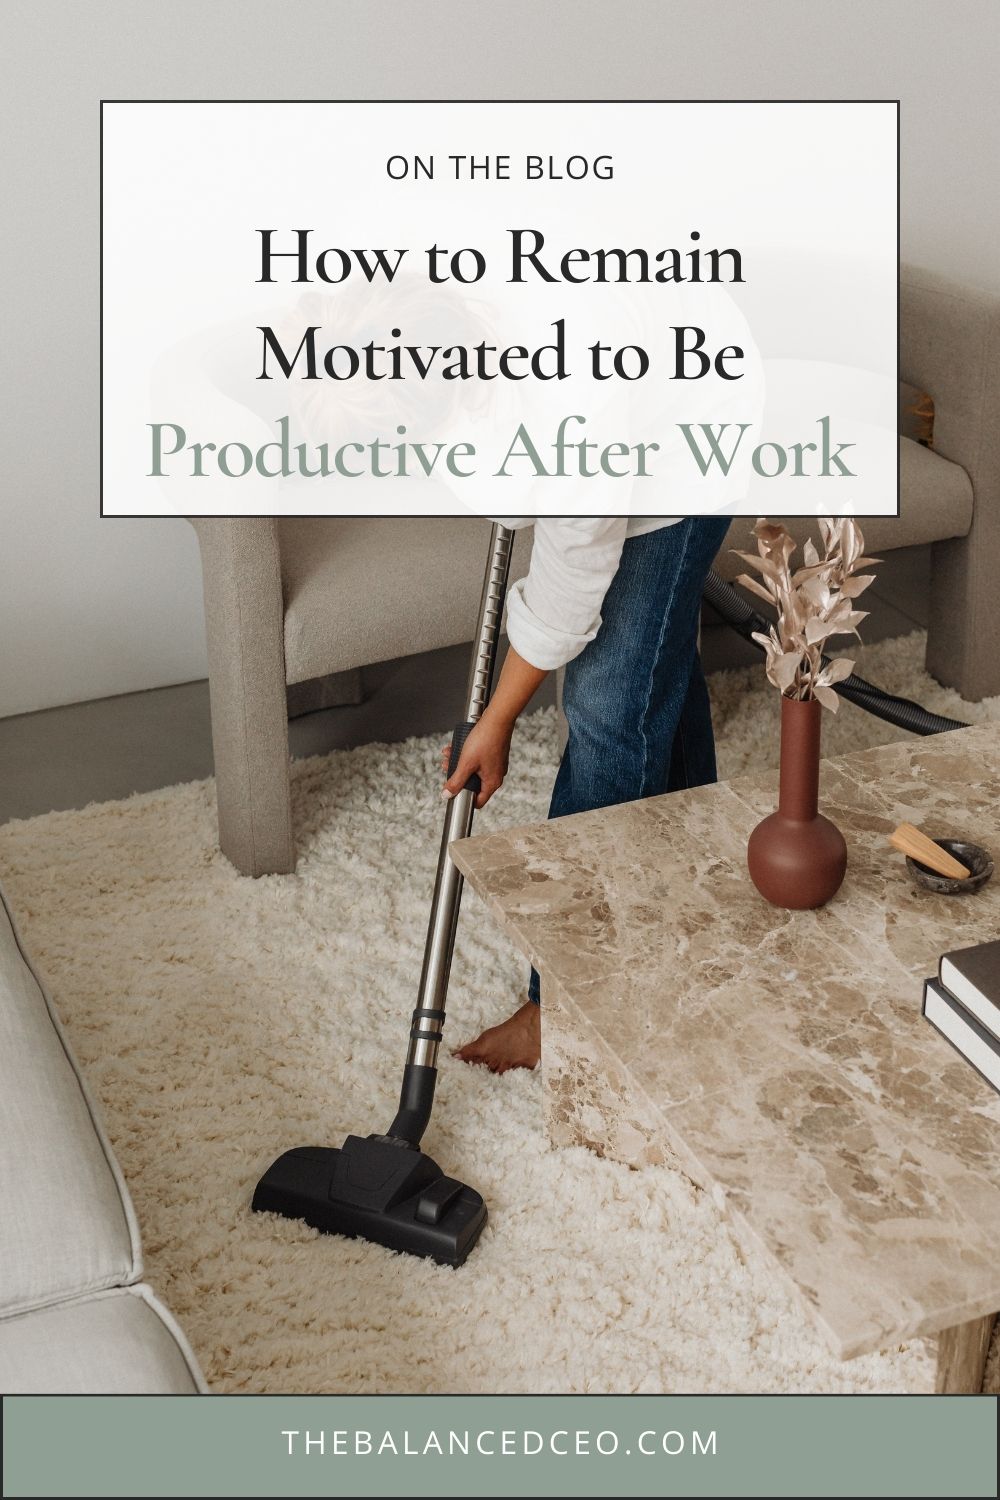 How to Remain Motivated to Be Productive After Work